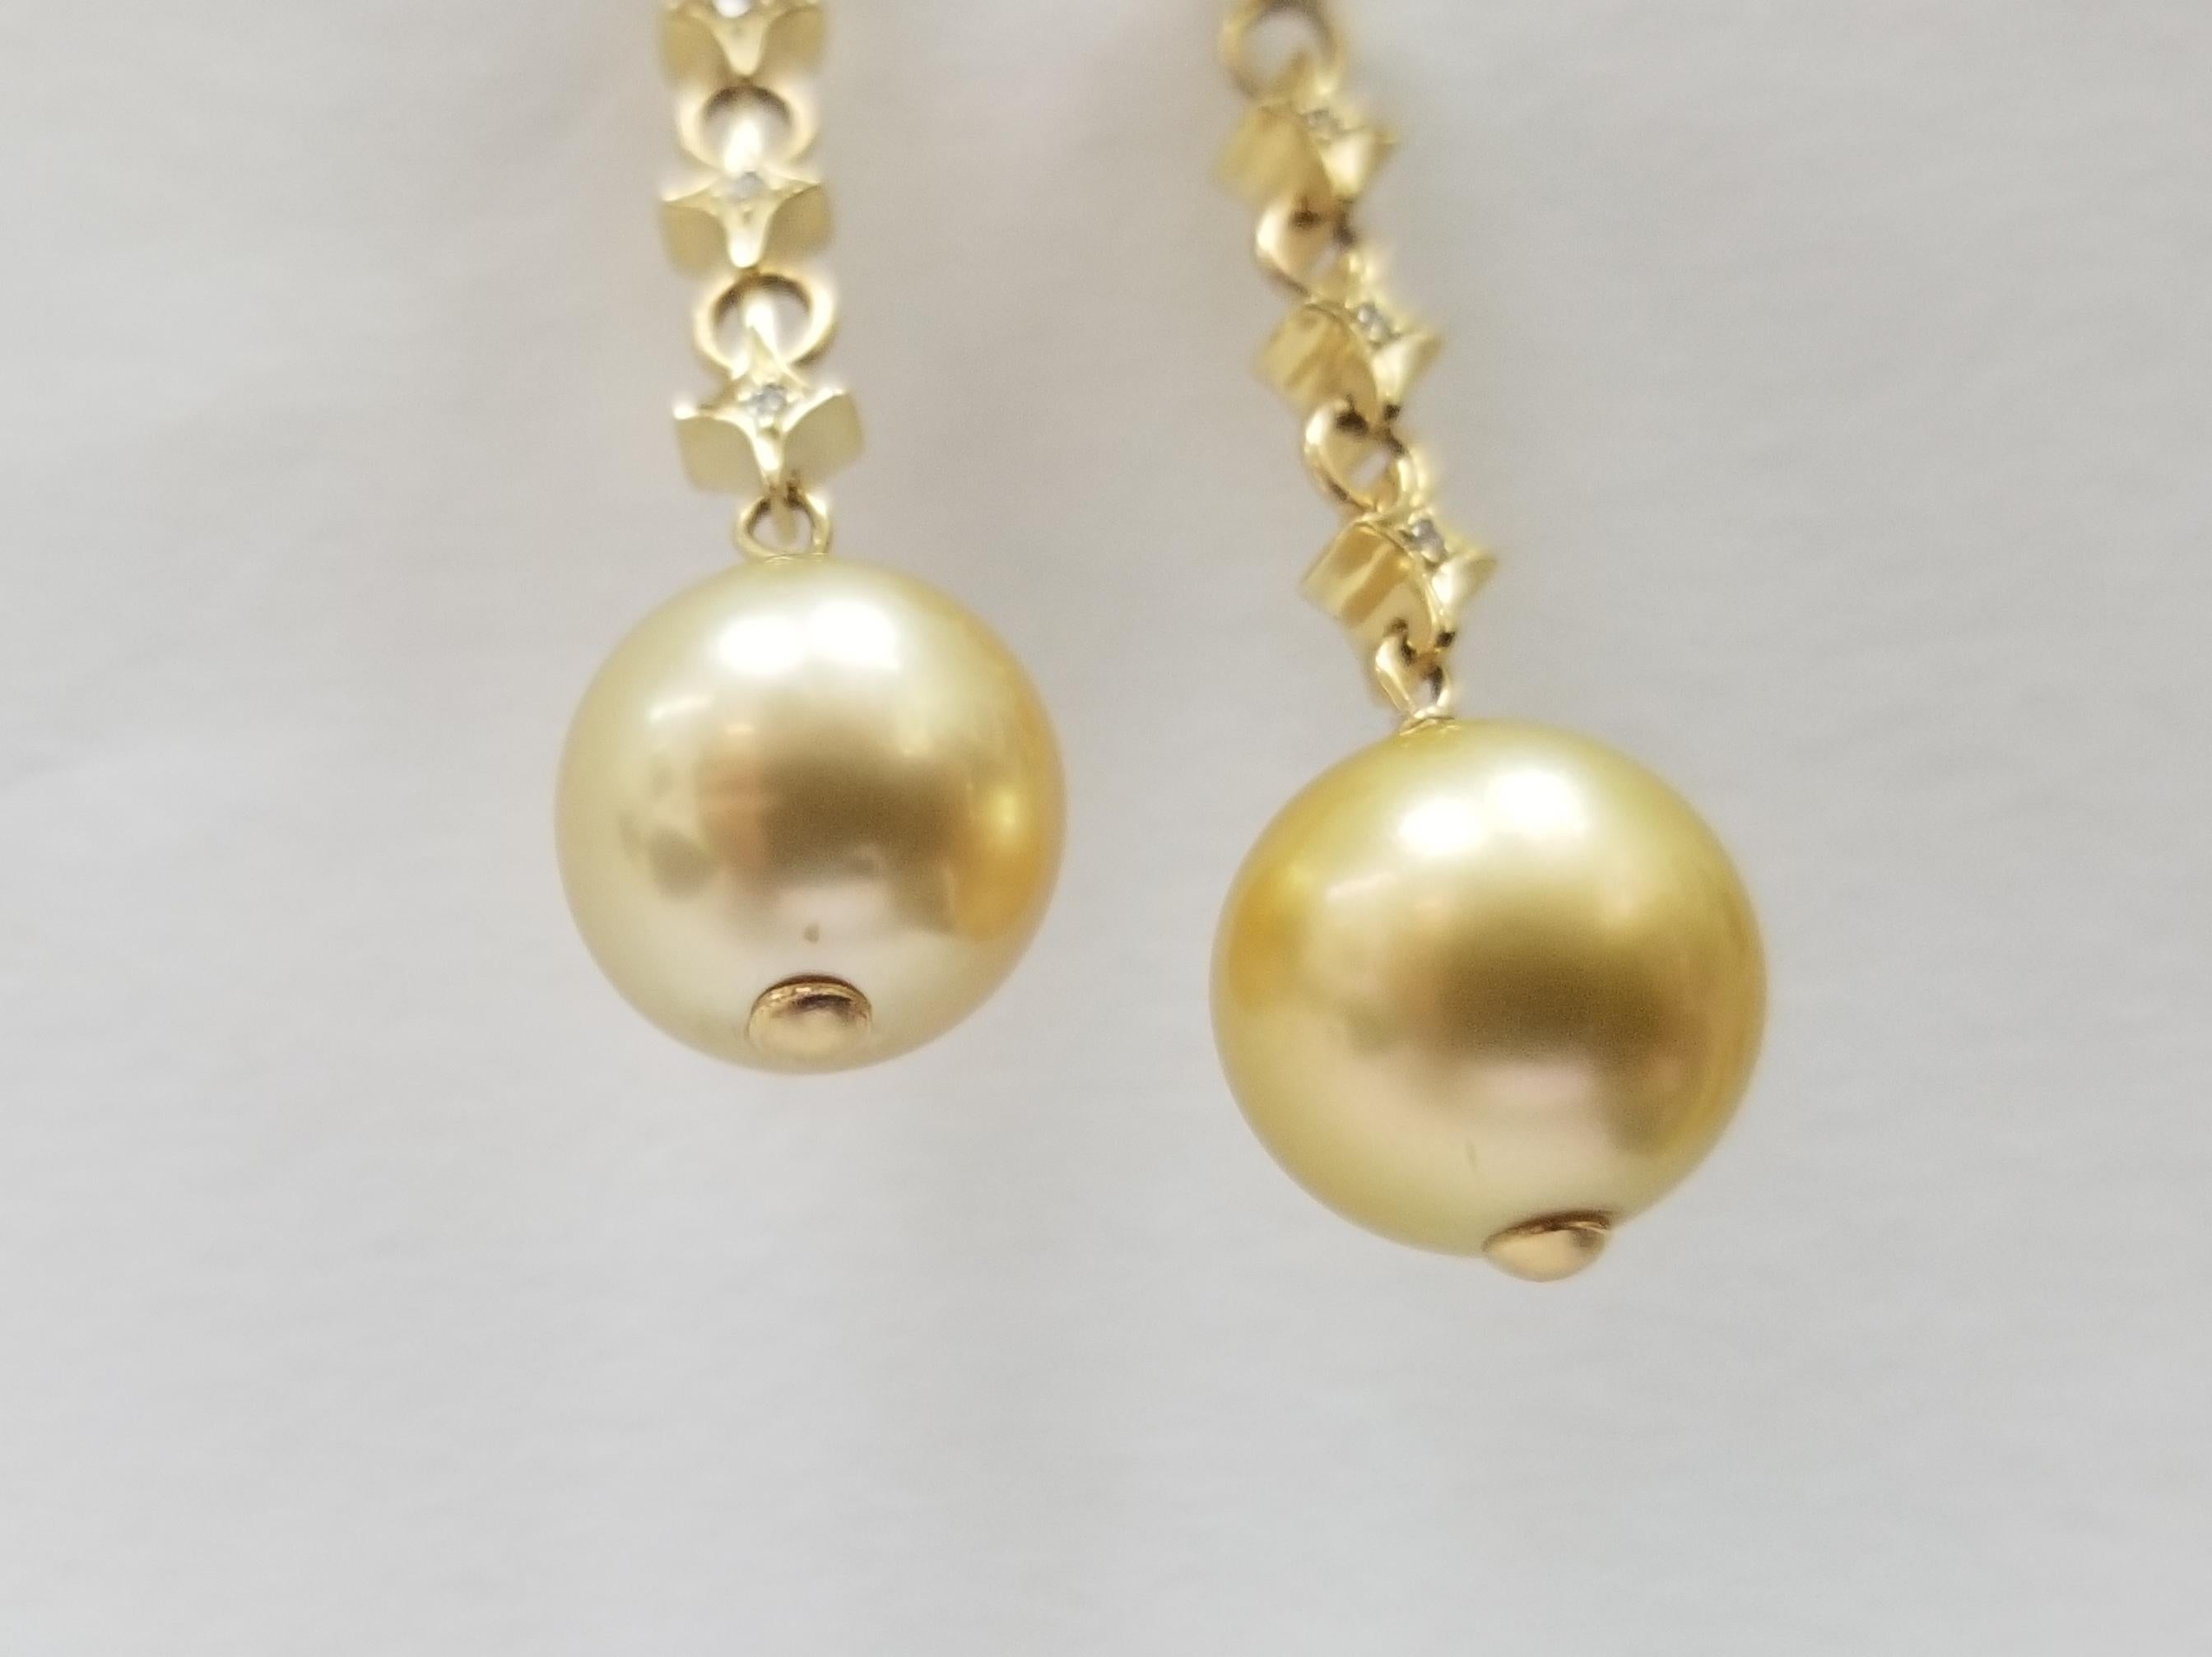 14k yellow gold Natural white and yellow South Sea pearl and diamond earrings, containing 2- 8.5 mm natural white south sea pearls and 2- 12mm natural yellow south sea pearls.  set with 6 round full cut diamonds weighing .06pts.